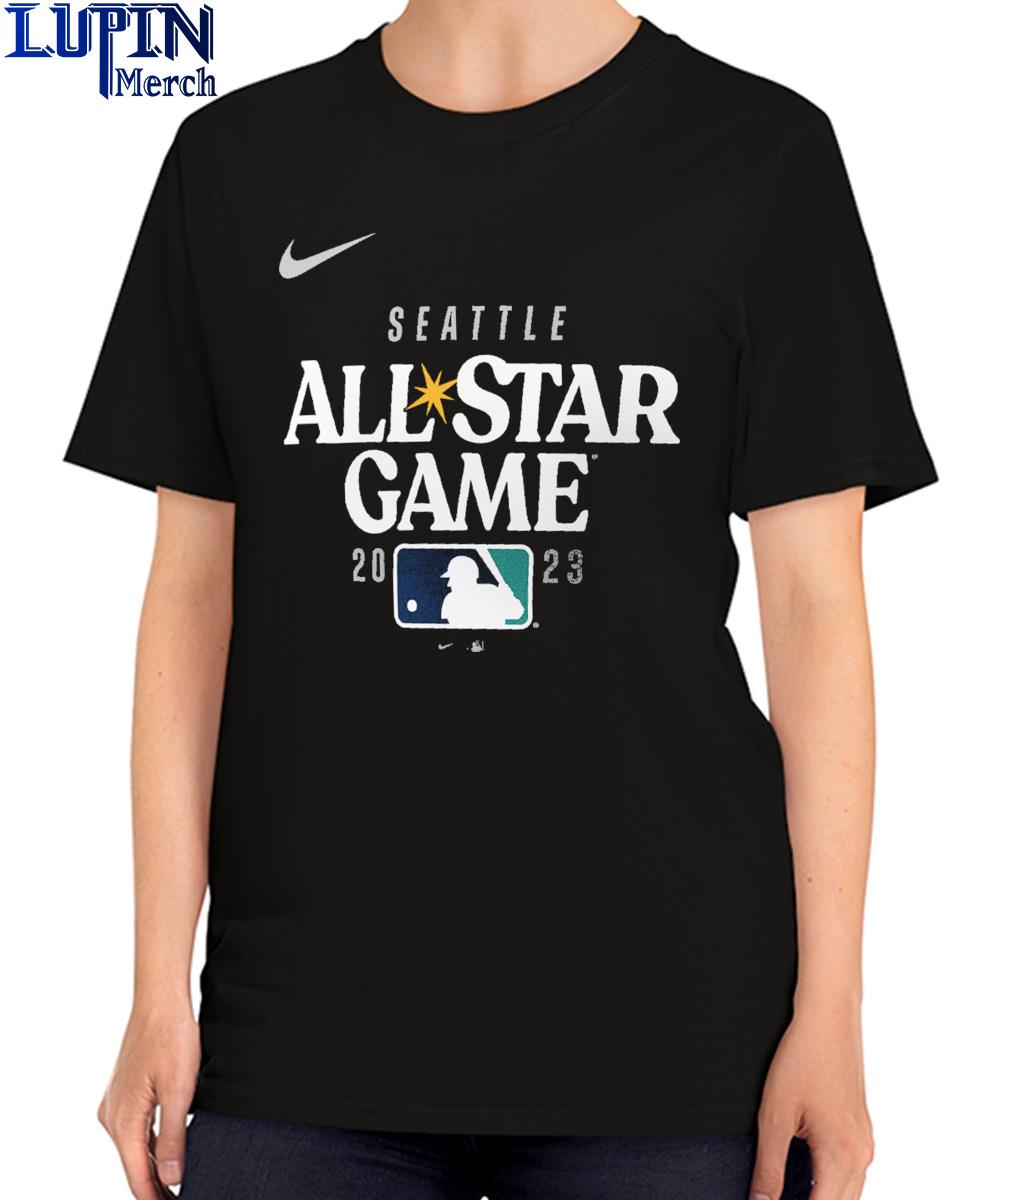 Vintage MLB 2001 All-Star Game (Seattle) T-Shirt by Nike. Men's